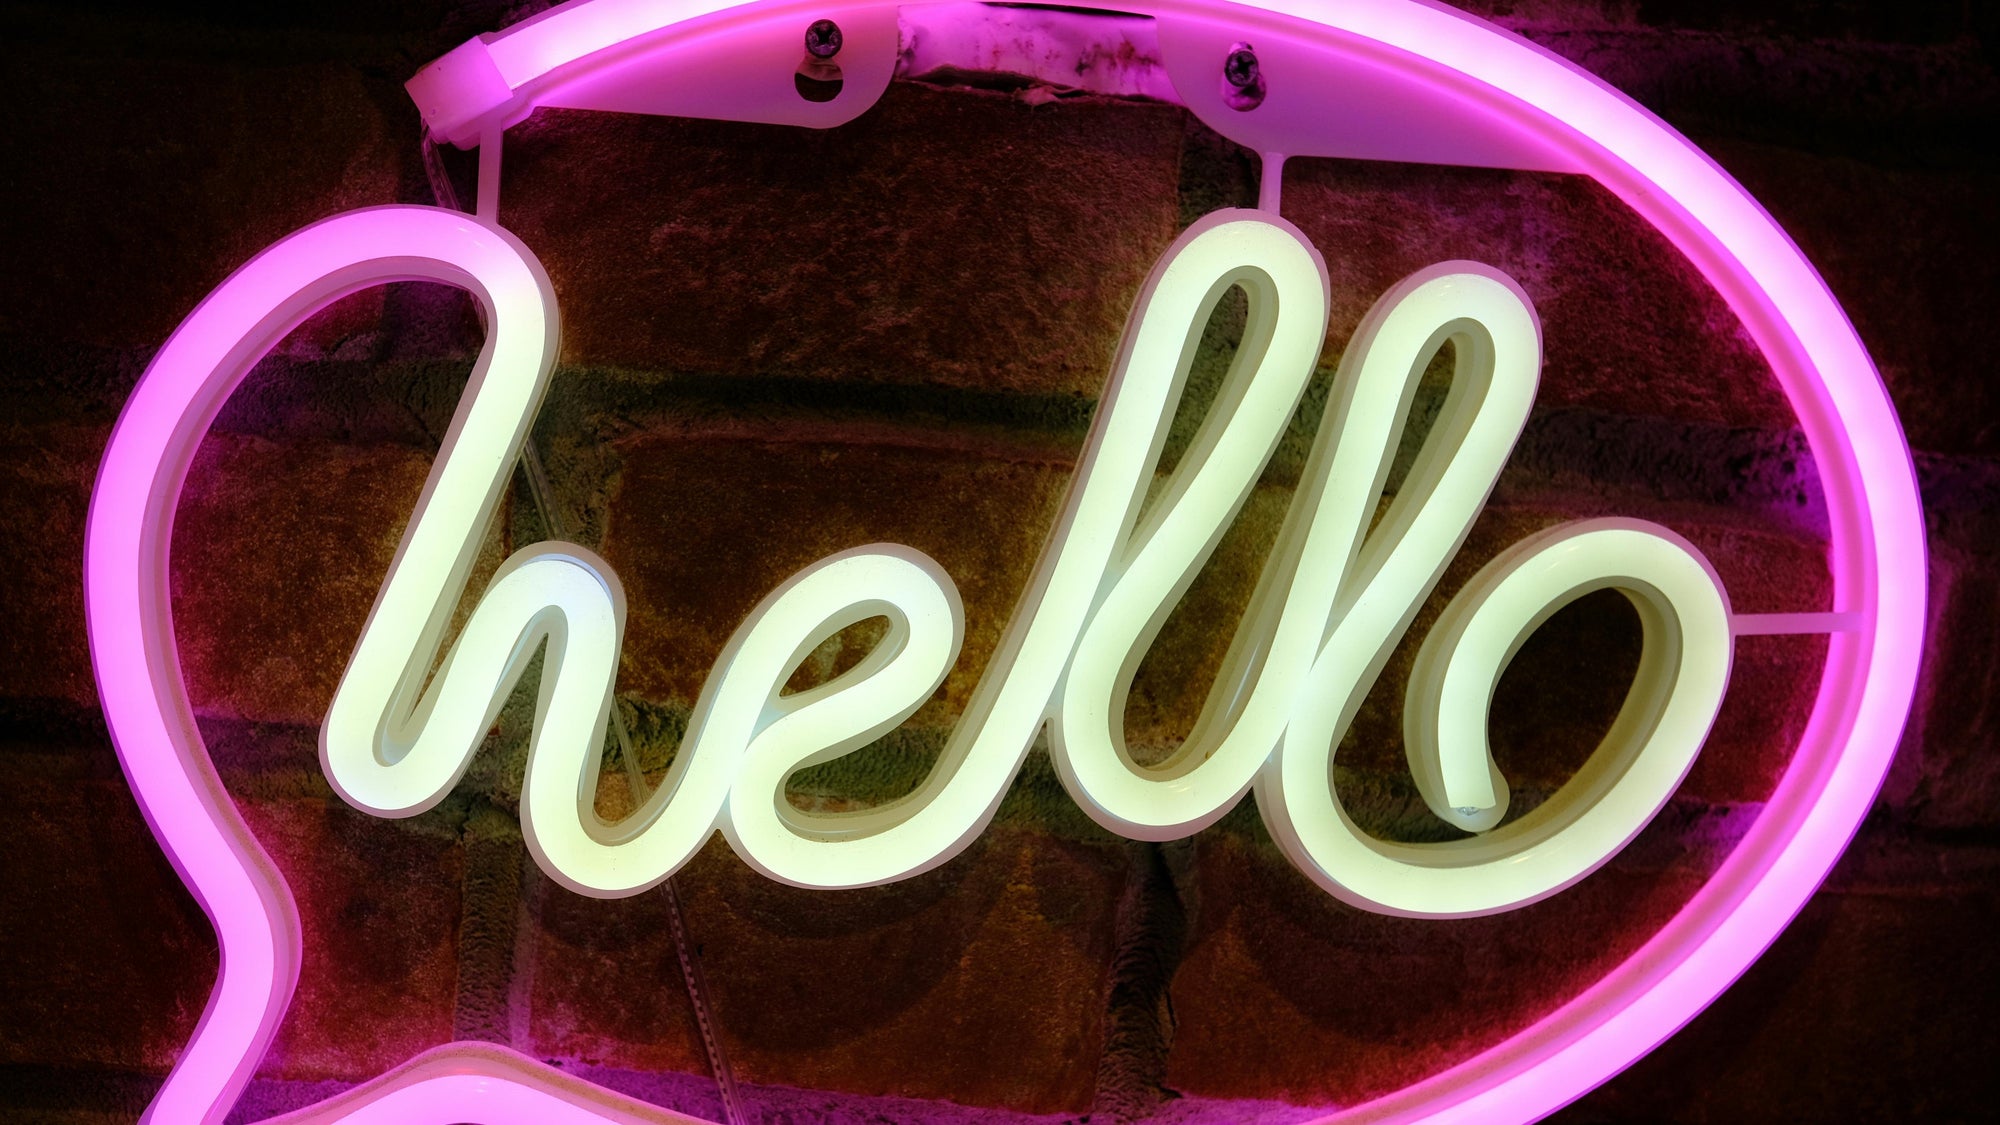 Custom Neon Signs vs. Other Home Decor